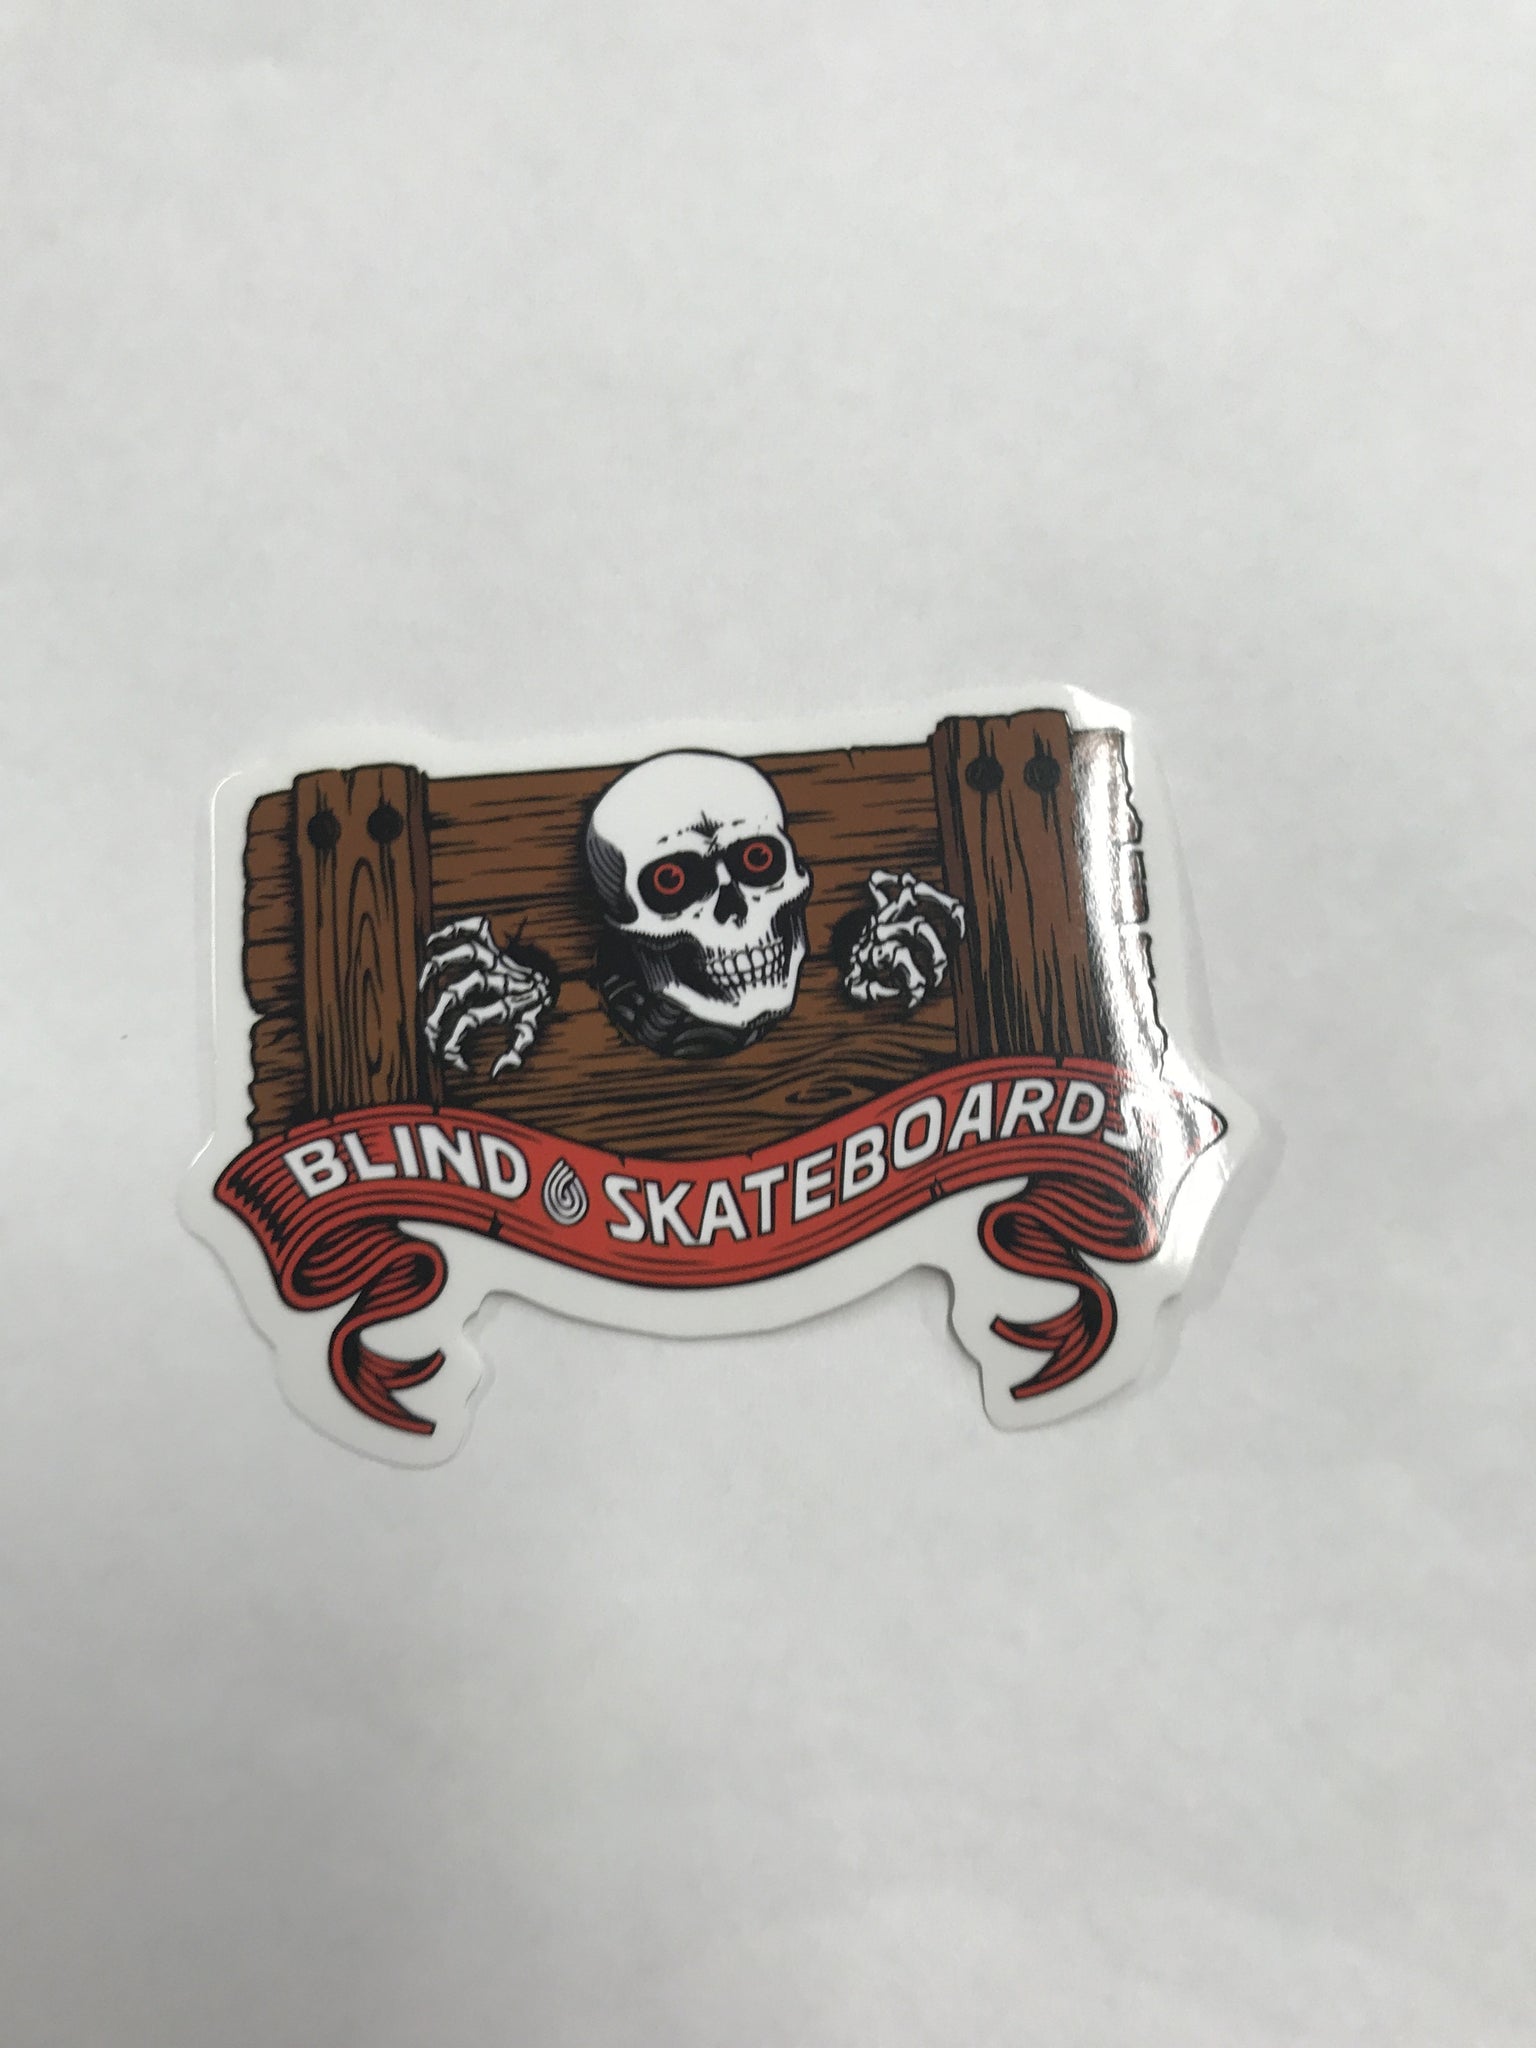 Blind Spoof Top Graphic Sticker